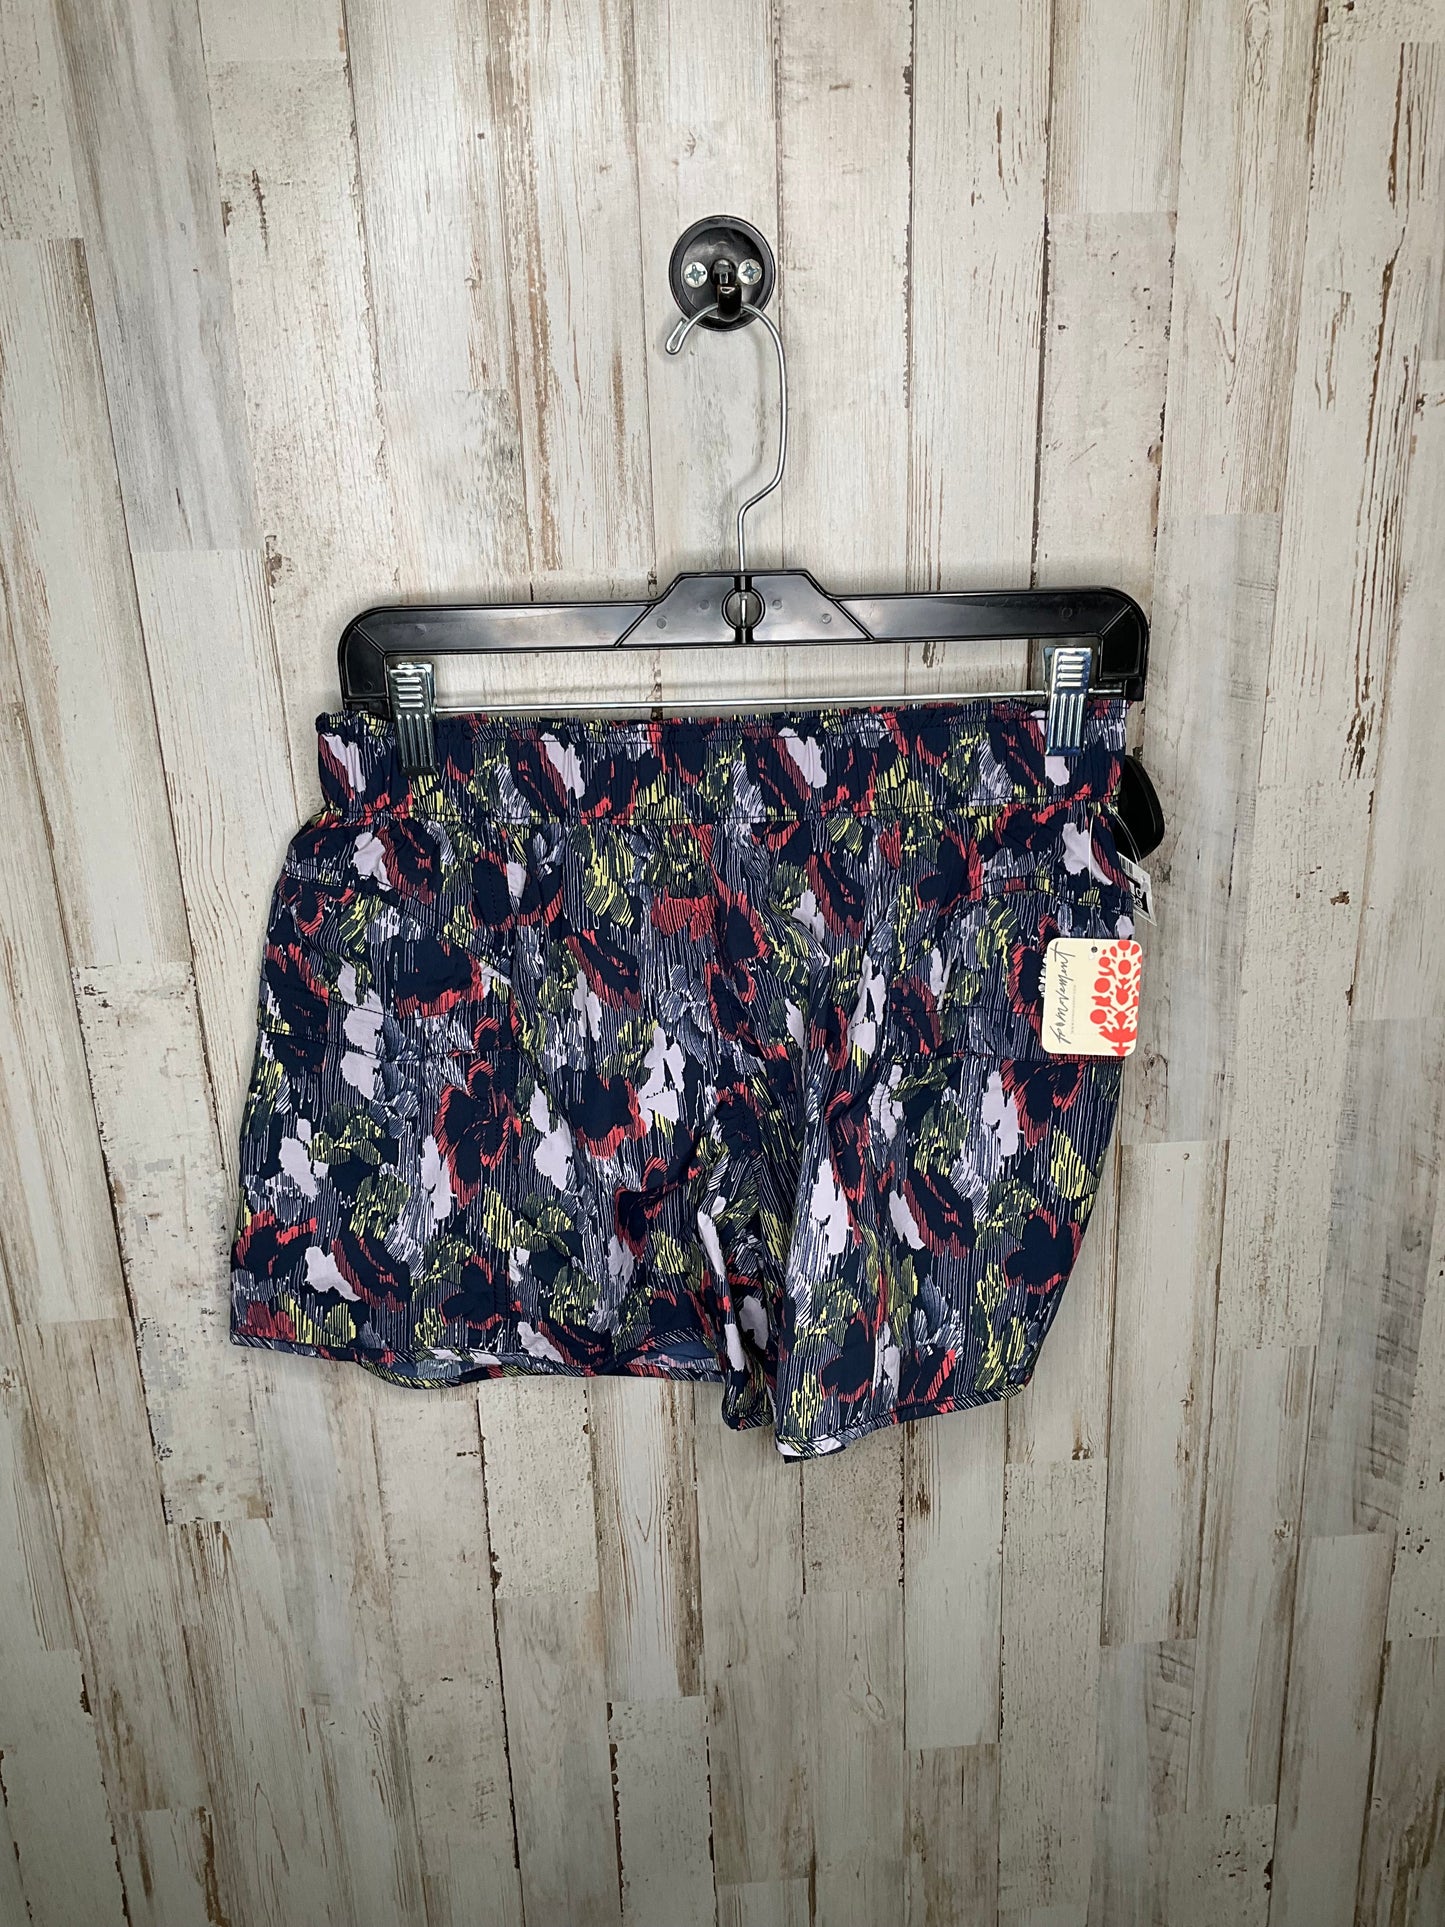 Multi-colored Athletic Shorts Free People, Size Xs